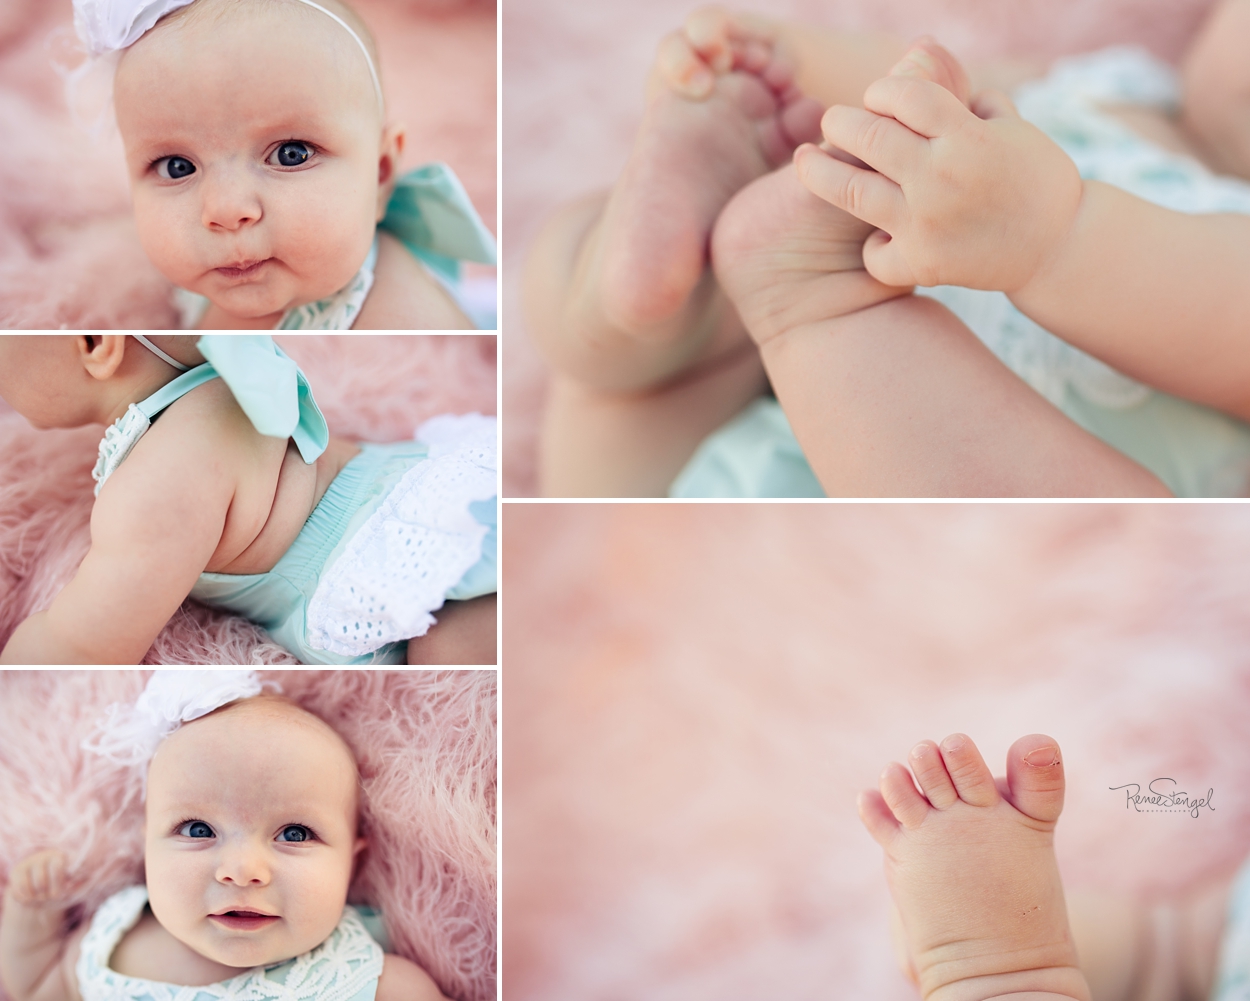 RENEE STENGEL Photography | Charlotte Portrait and Underwater Photographer | Six Month Baby Milestone in Pink and Mint